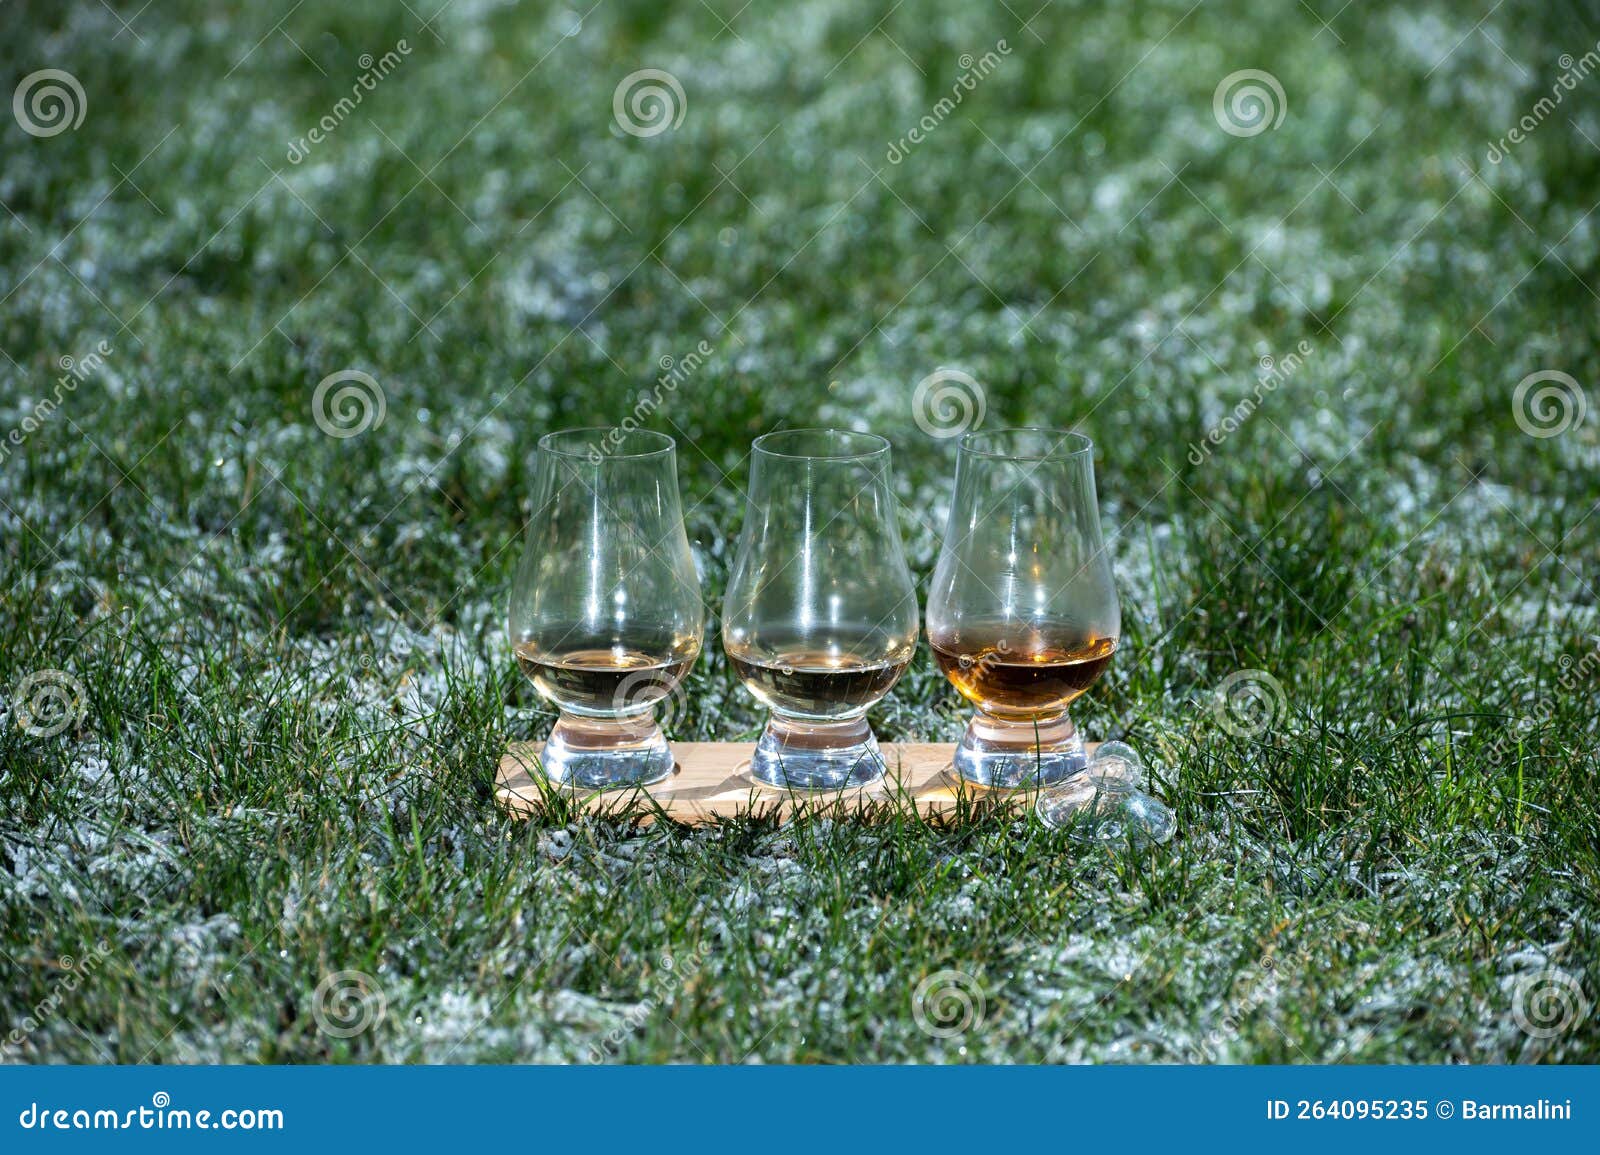 Glasses of ice cold Scotch single malt or blended whisky on white frosted green grass, cold winter in Scotland